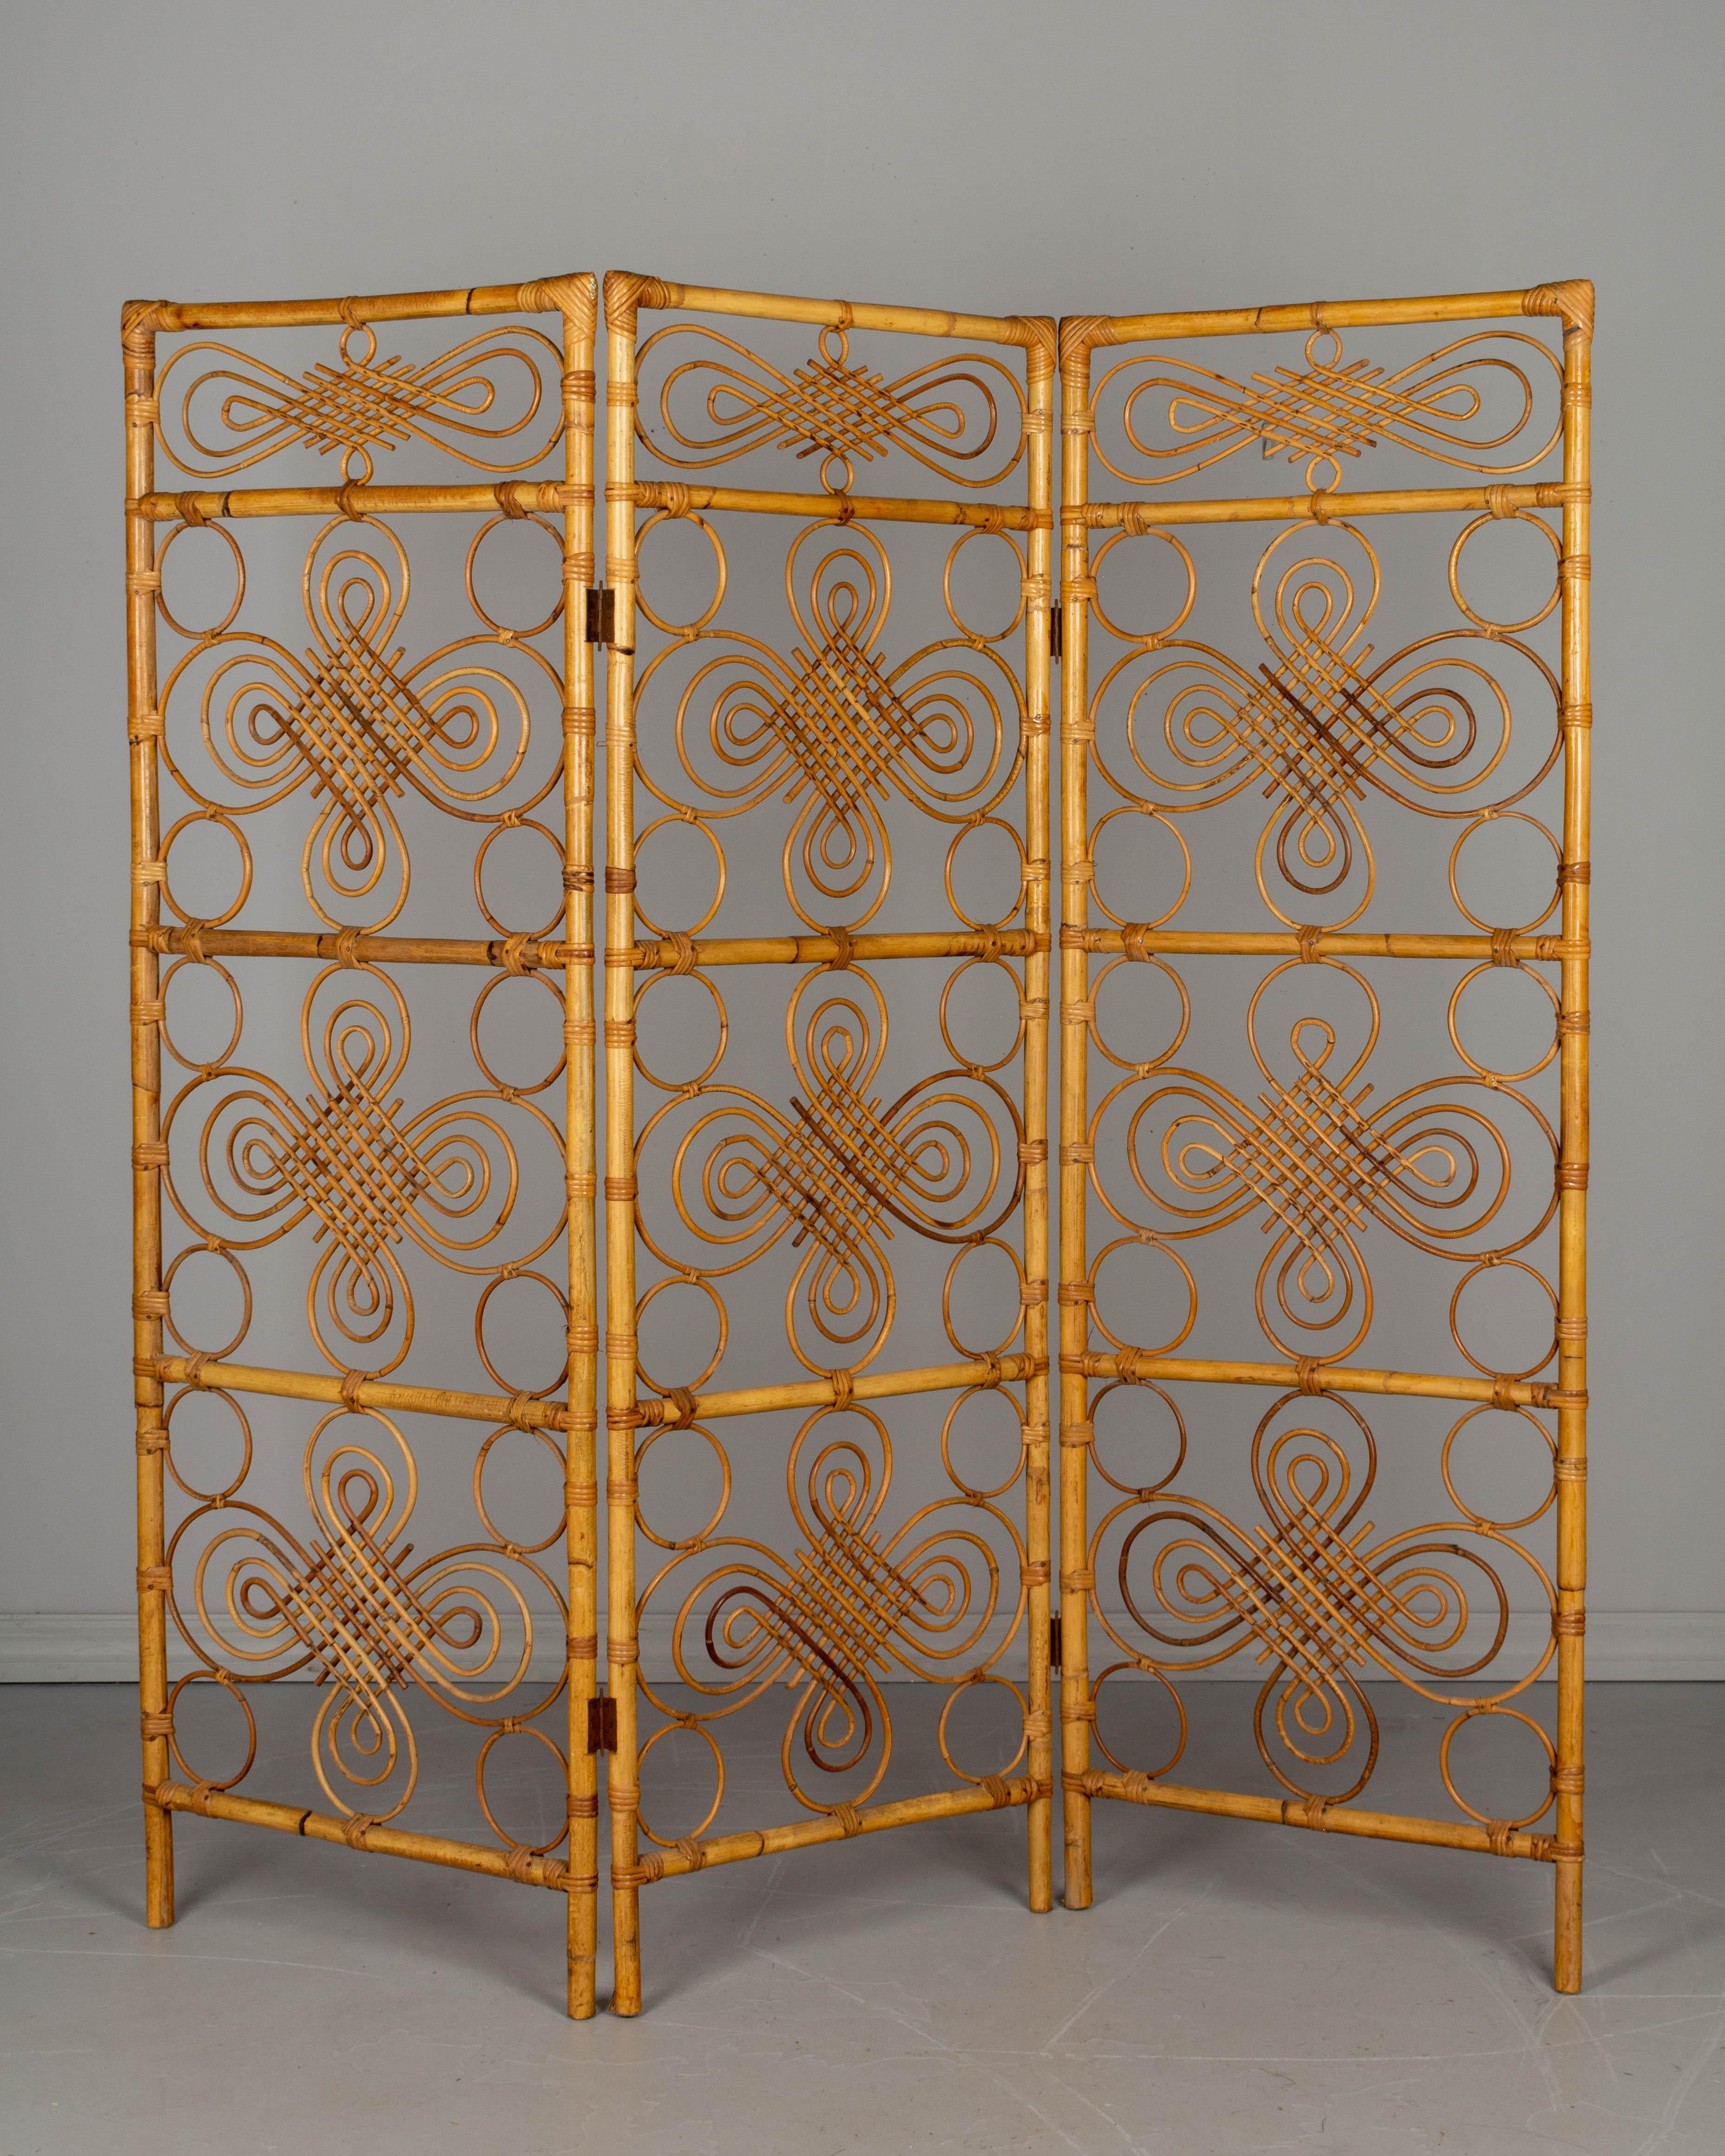 A midcentury French Riviera three-panel folding screen, or room divider, with sturdy handcrafted bamboo and rattan frame and wicker filigree decoration. Brass-plated hinges. Each panel is 1.25